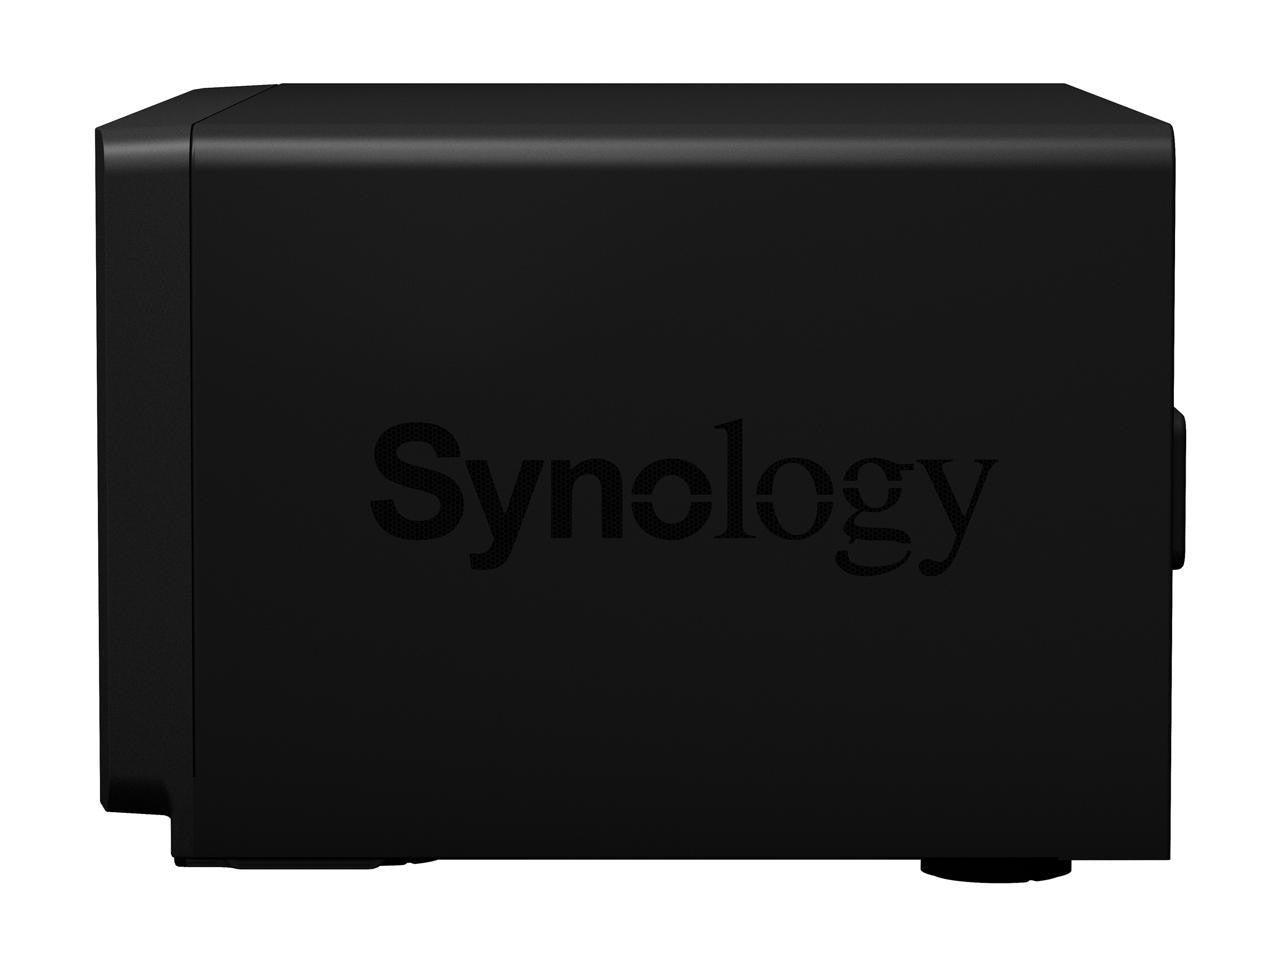 Synology DS1821+ 8-BAY DiskStation with 4GB Synology RAM and 80TB (8x10TB) Western Digital RED PLUS Drives Fully Assembled and Tested